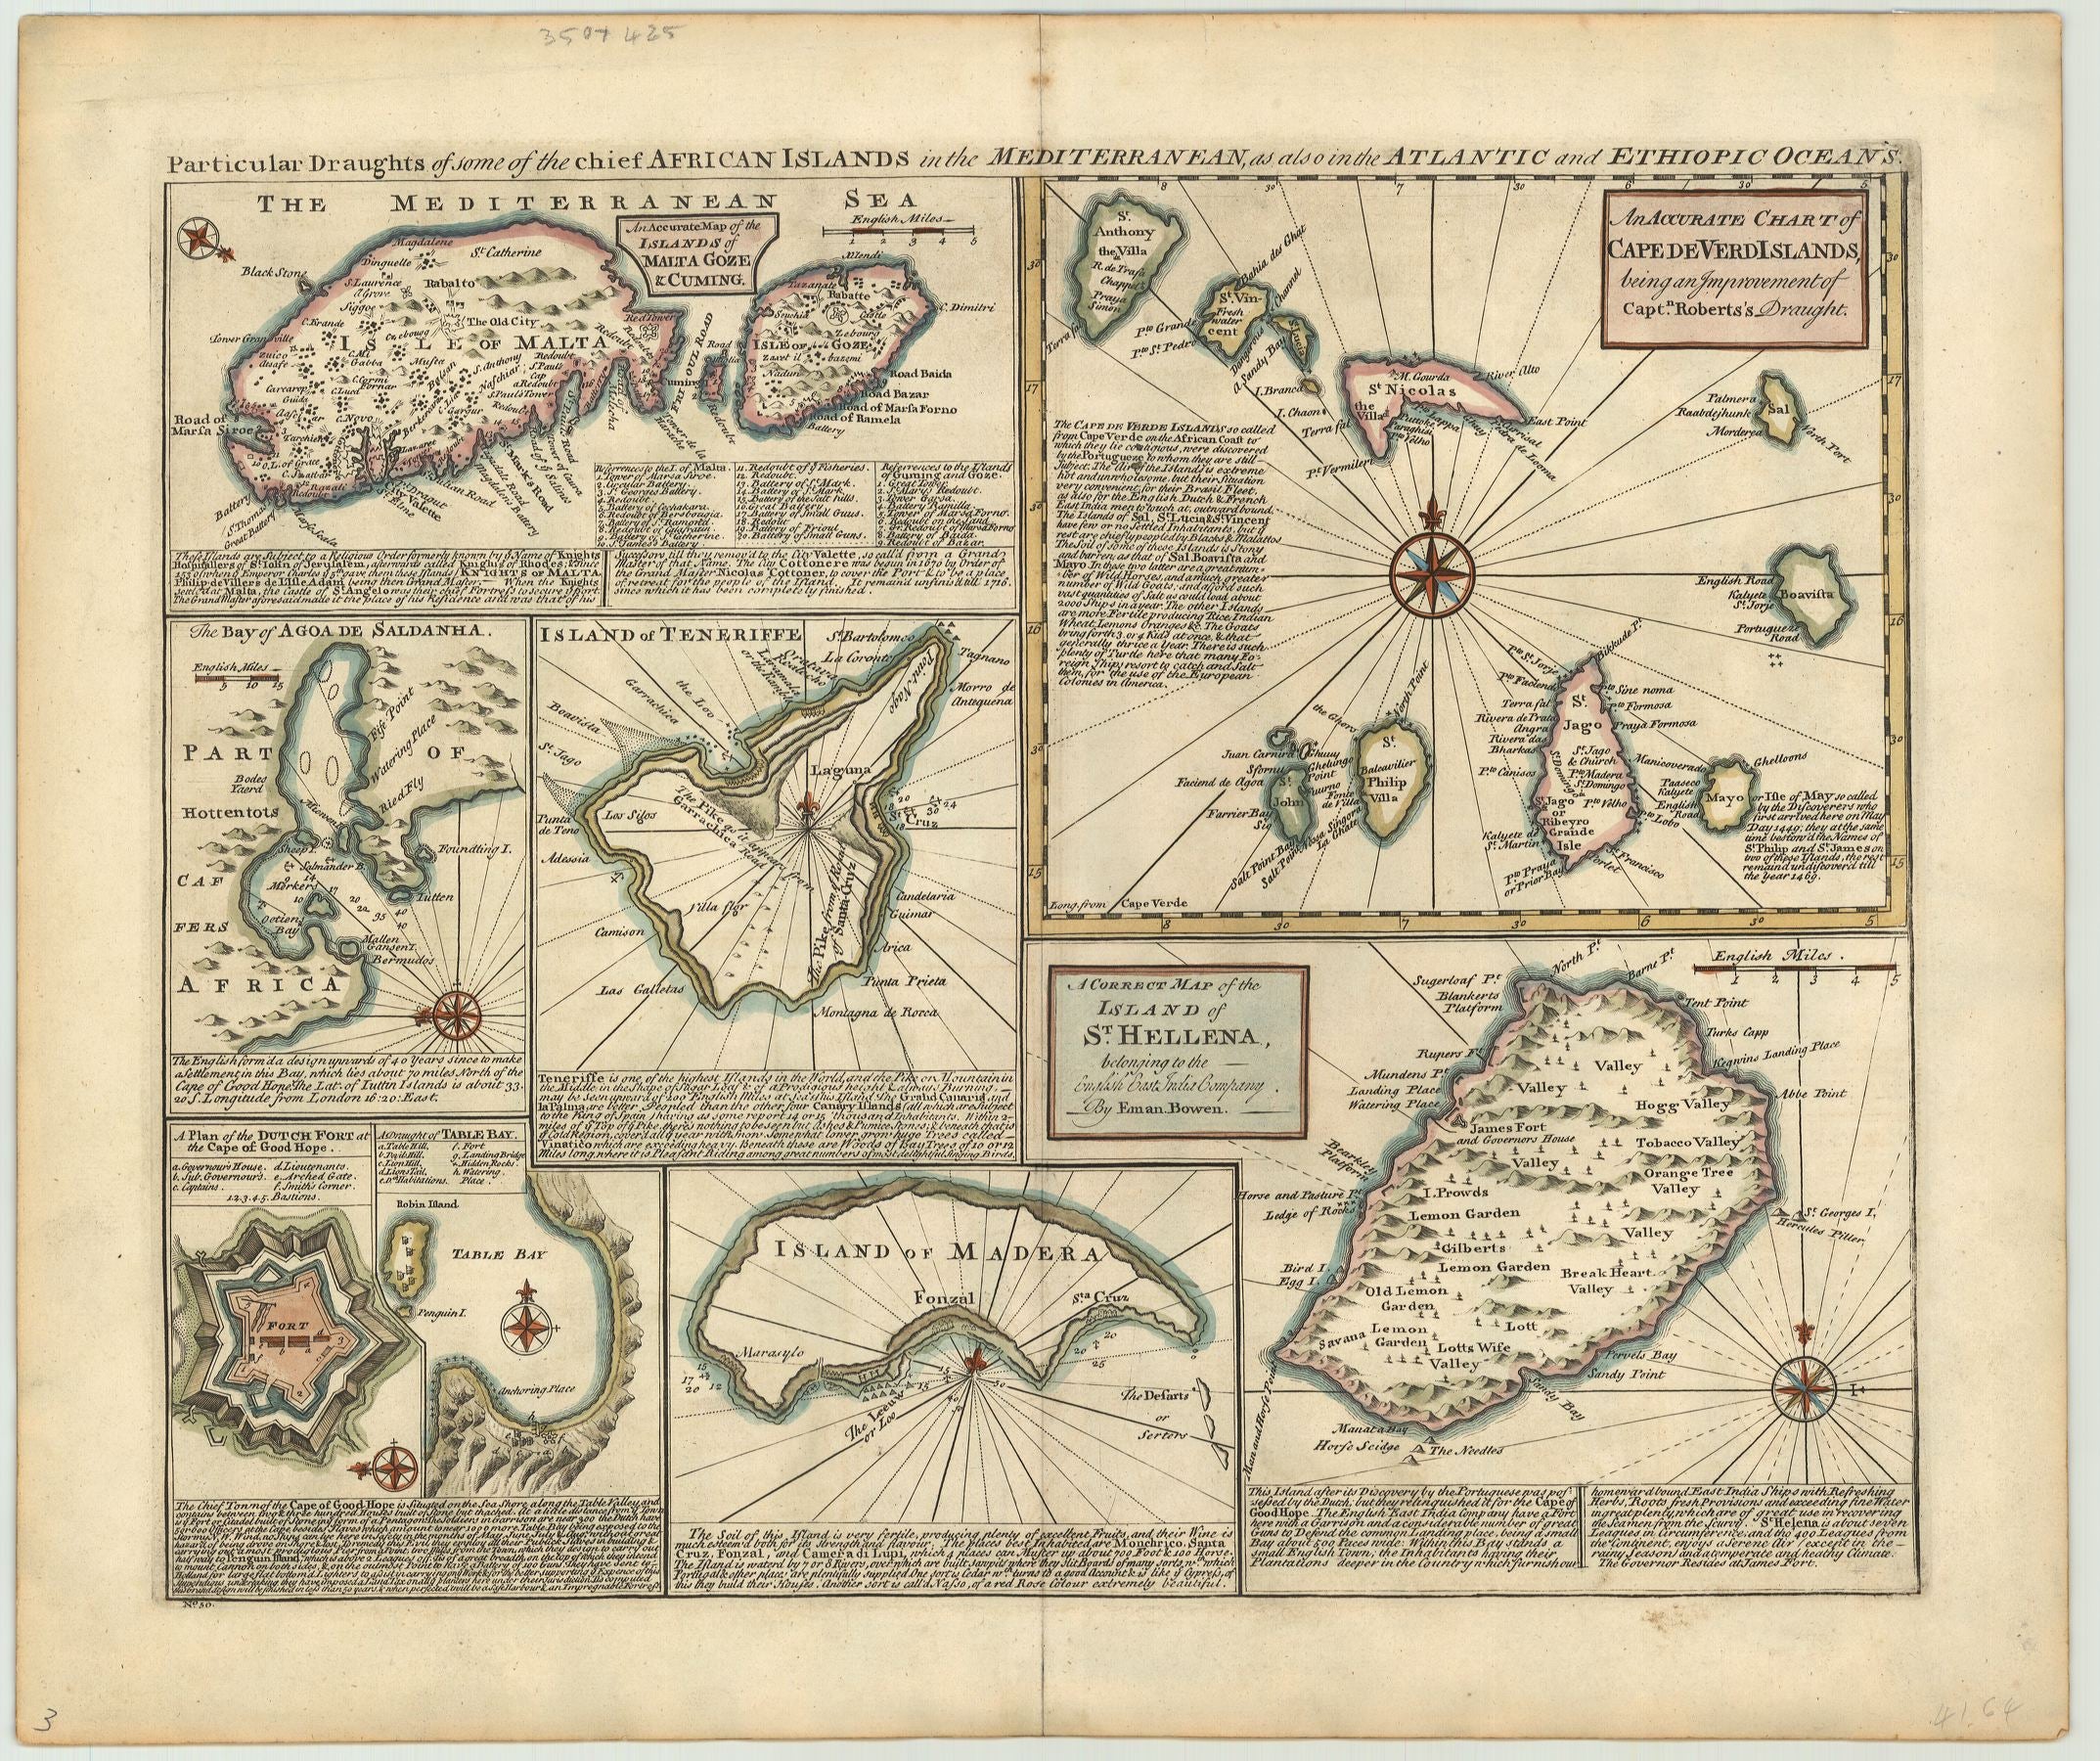 R2456  Bowen, Emanuel: Particular Draughts of some of the African Islands in the Mediterranean as also the Atlantic and Ethiopic Sea 1745